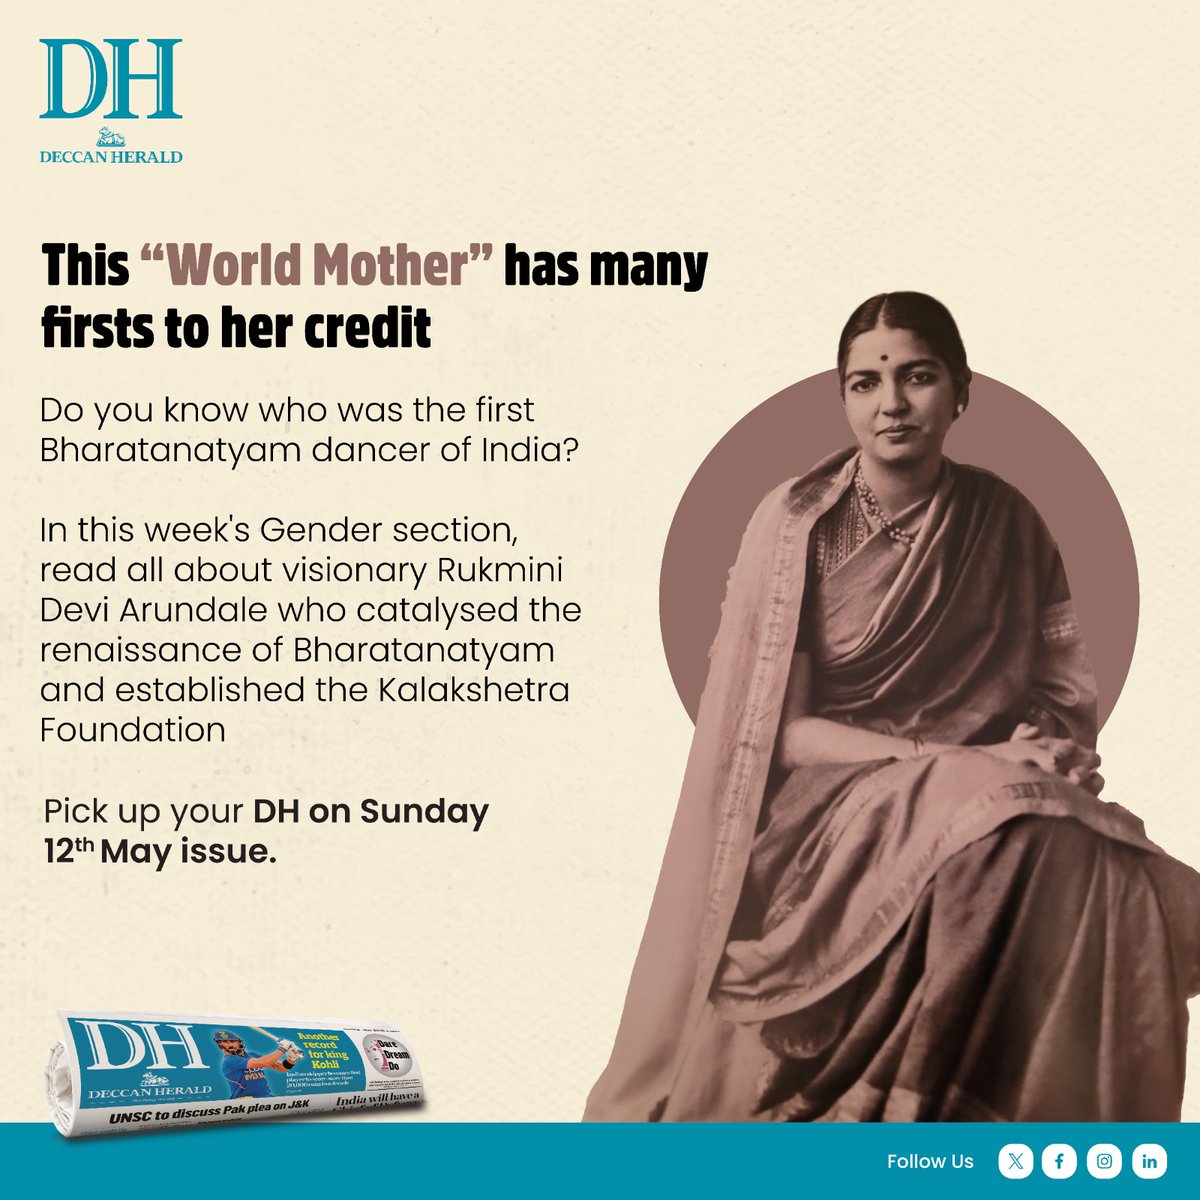 Do you know who was the first Bharatanatyam dancer of India or the first woman in Indian history to be nominated as a member of the Rajya Sabha? In this week's Gender section, read all about theosophist, and animal rights activist Rukmini Devi Arundale who catalysed the